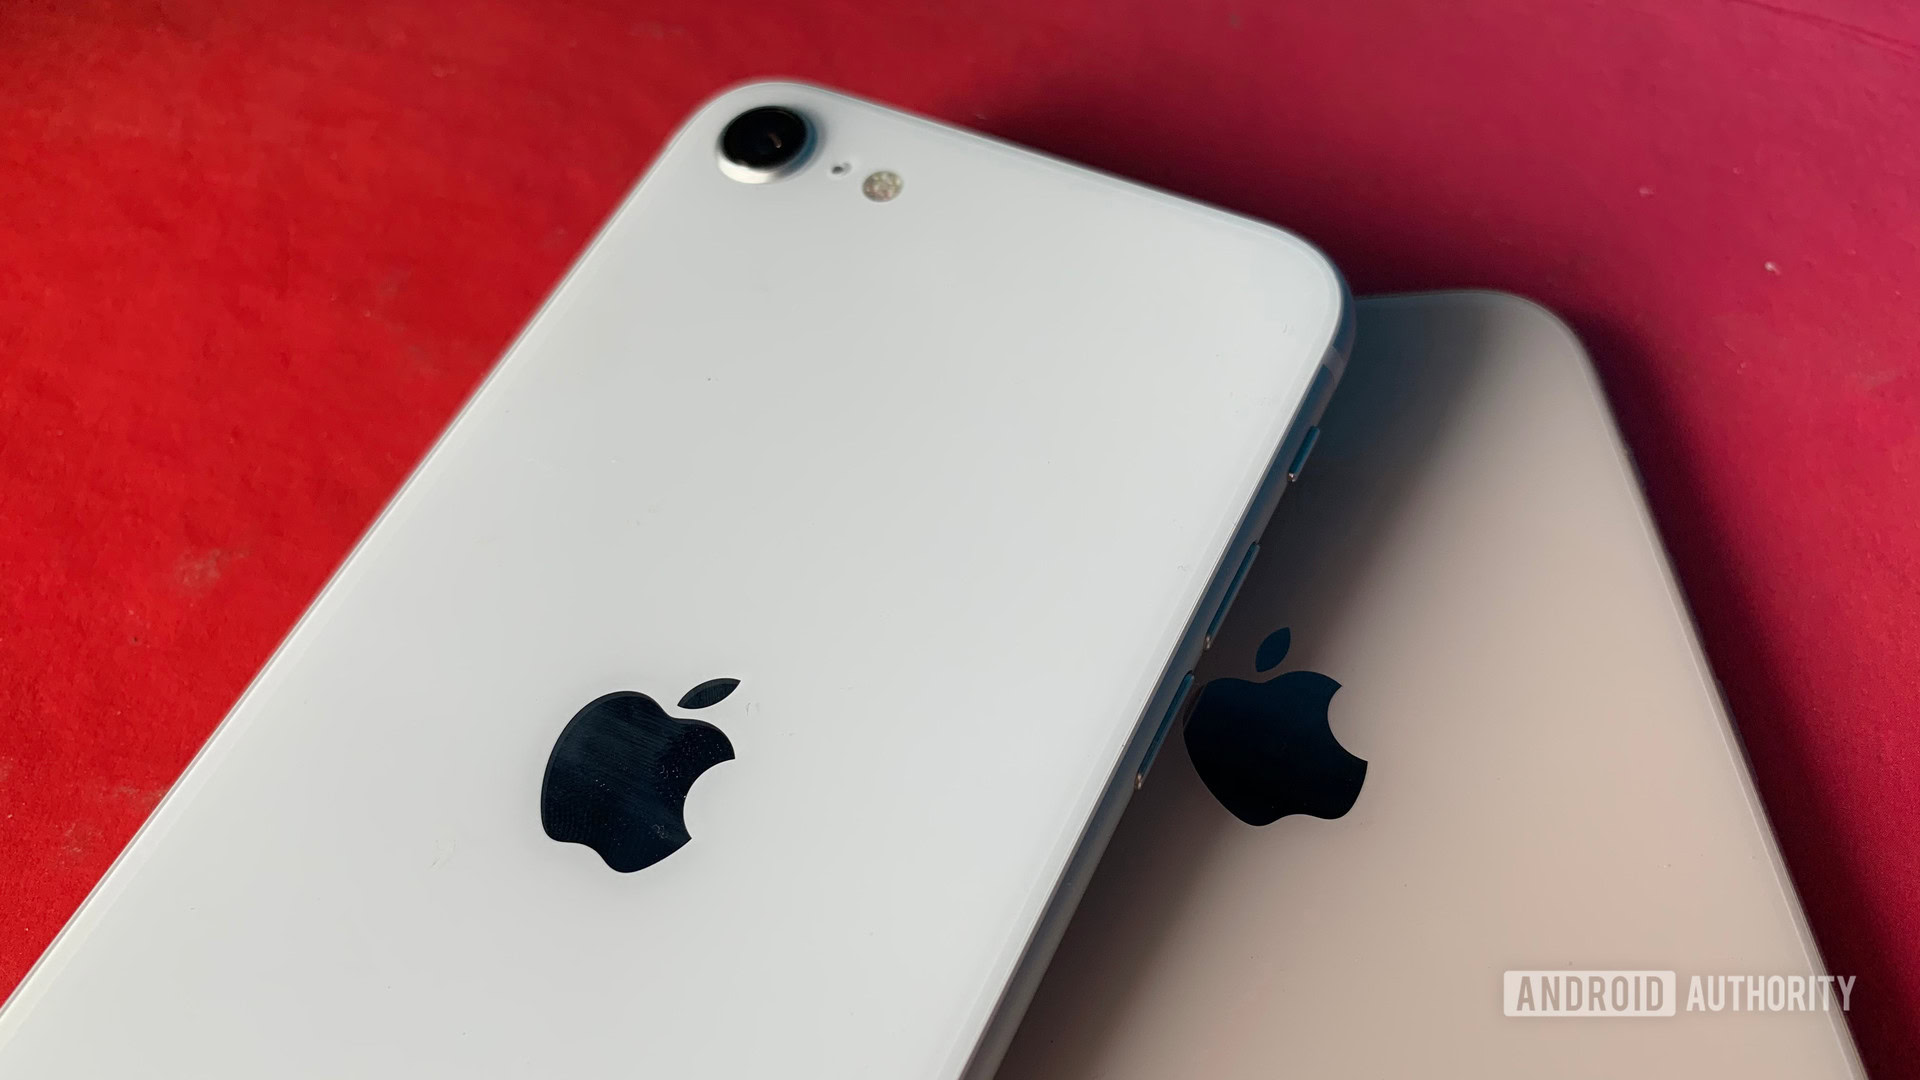 Apple iPhone SE iPhone Which budget iPhone is better for